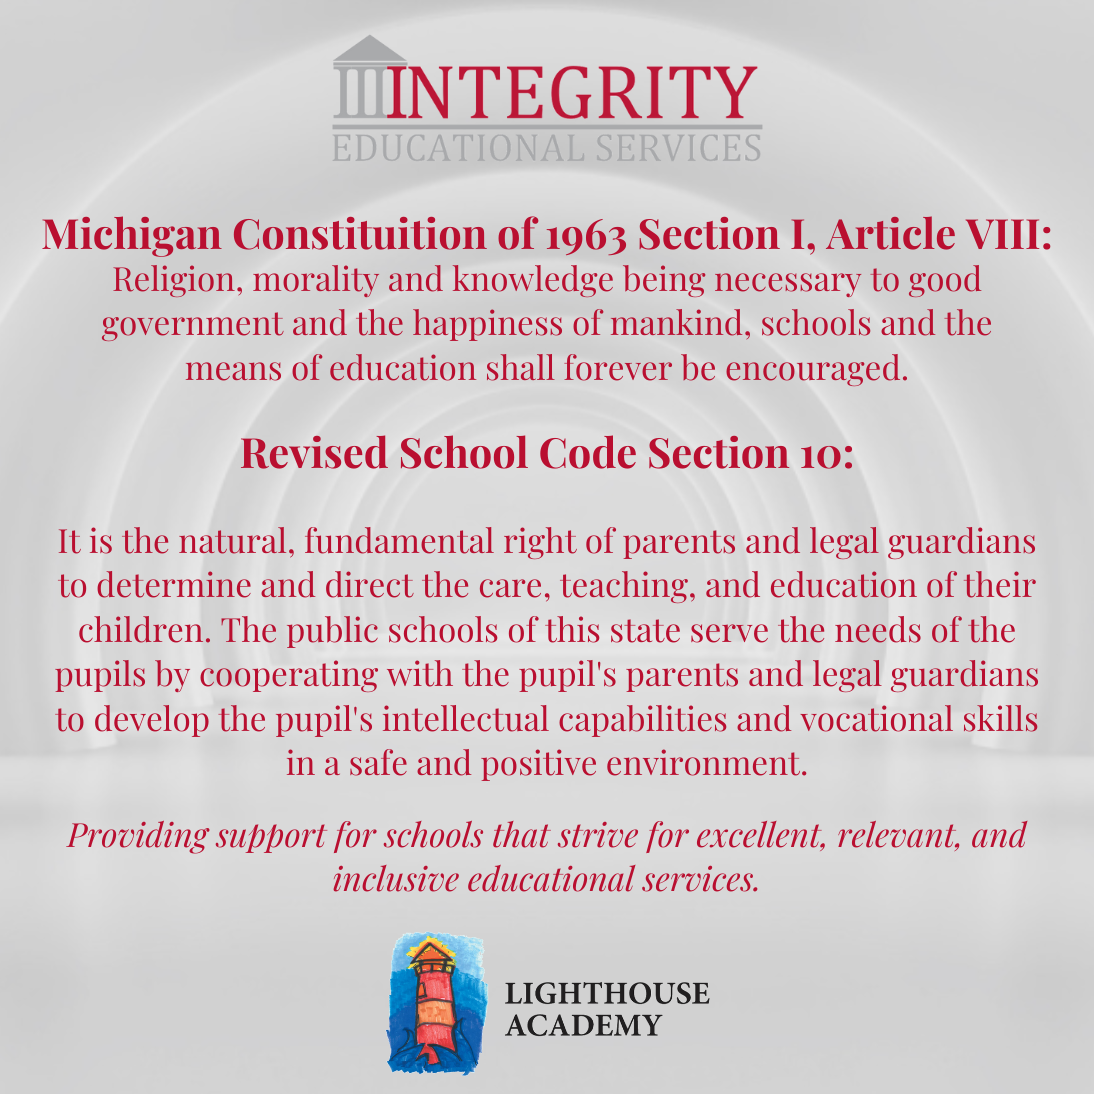 Michigan Constituition of 1963 Section I, Article VIII: Religion, morality and knowledge being necessary to good government and the happiness of mankind, schools and the means of education shall forever be encouraged. Revised School Code Section 10: It is the natural, fundamental right of parents and legal guardians to determine and direct the care, teaching, and education of their children. The public schools of this state serve the needs of the pupils by cooperating with the pupil's parents and legal guardians to develop the pupil's intellectual capabilities and vocational skills in a safe and positive environment.